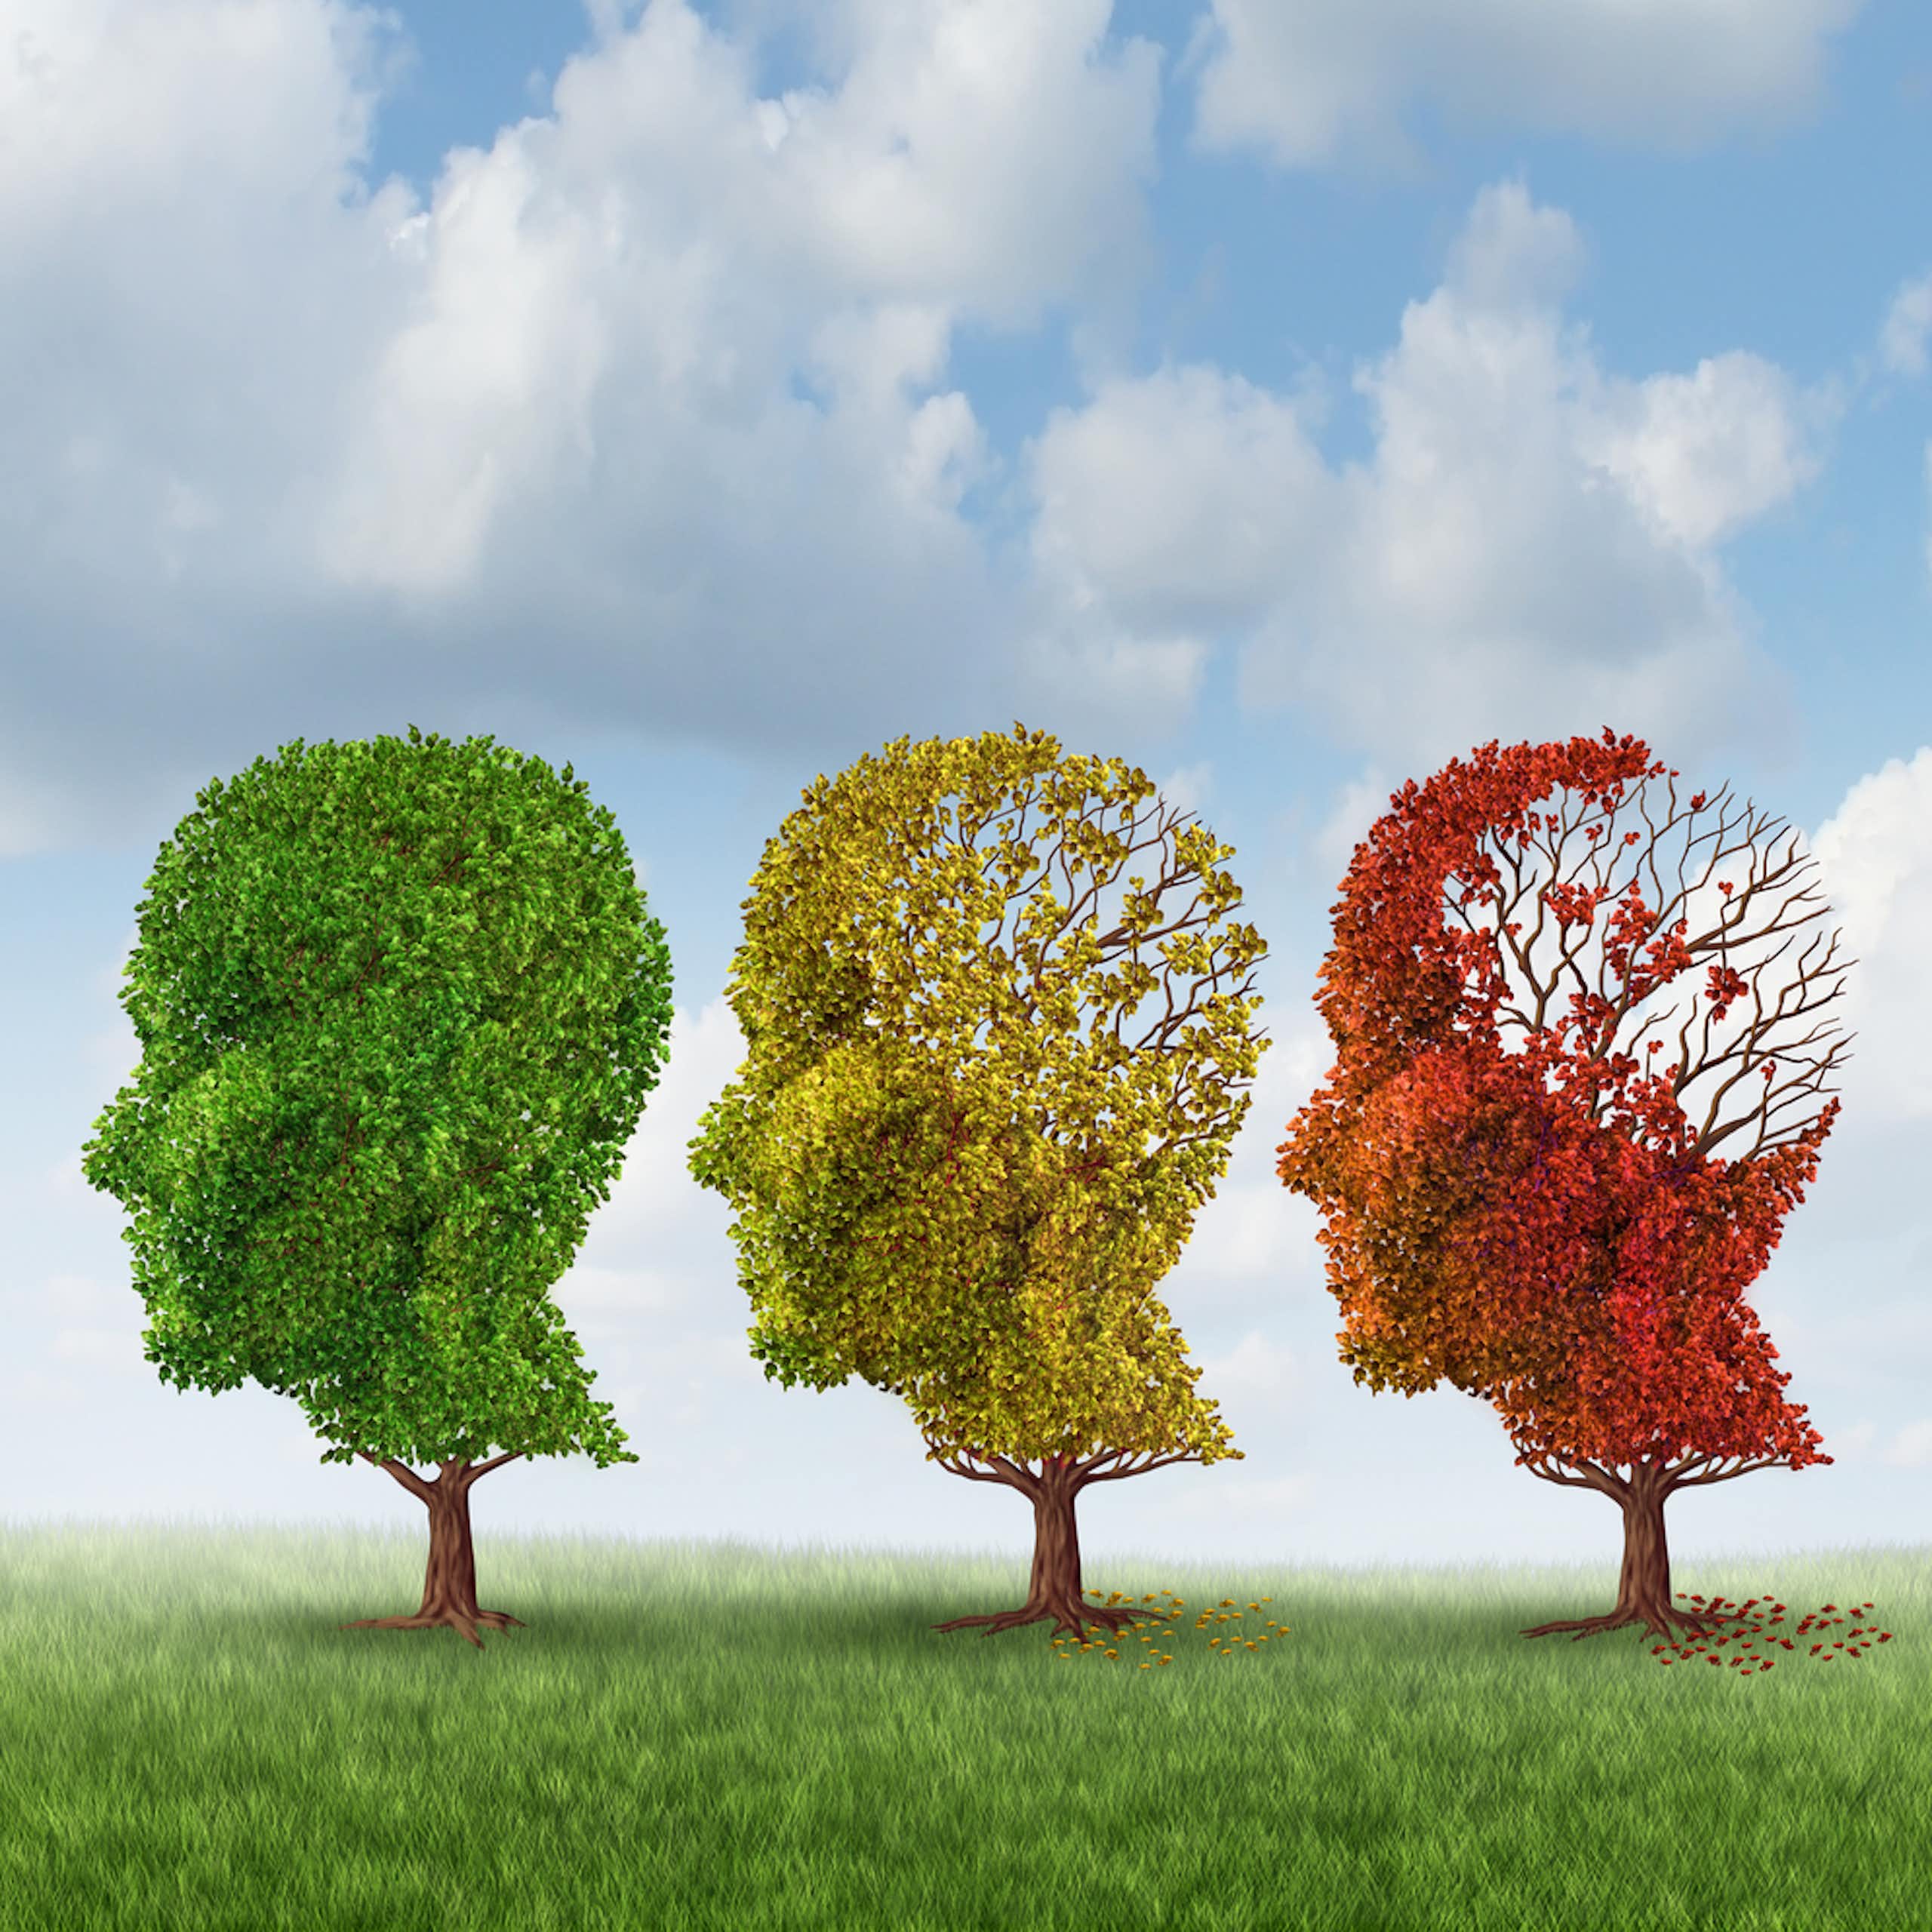 What’s the difference between Alzheimer’s and dementia?